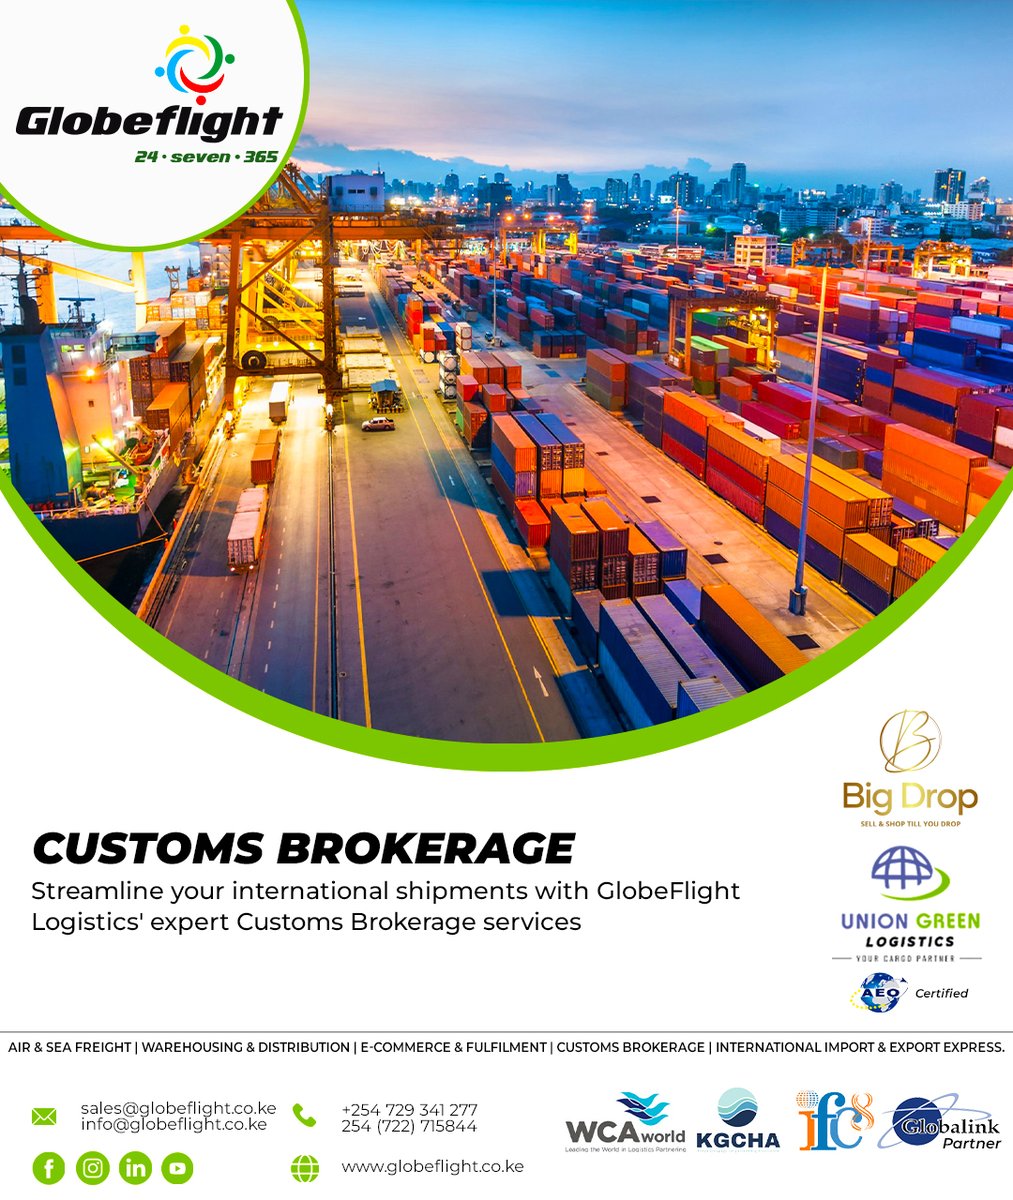 Let GlobeFlight Logistics take care of your customs brokerage needs! Our expert team ensures smooth clearance, minimizing delays and maximizing efficiency for your imports and exports. 🌍📦💼 #CustomsBrokerage #EfficientLogistics #GlobeFlightLogistics